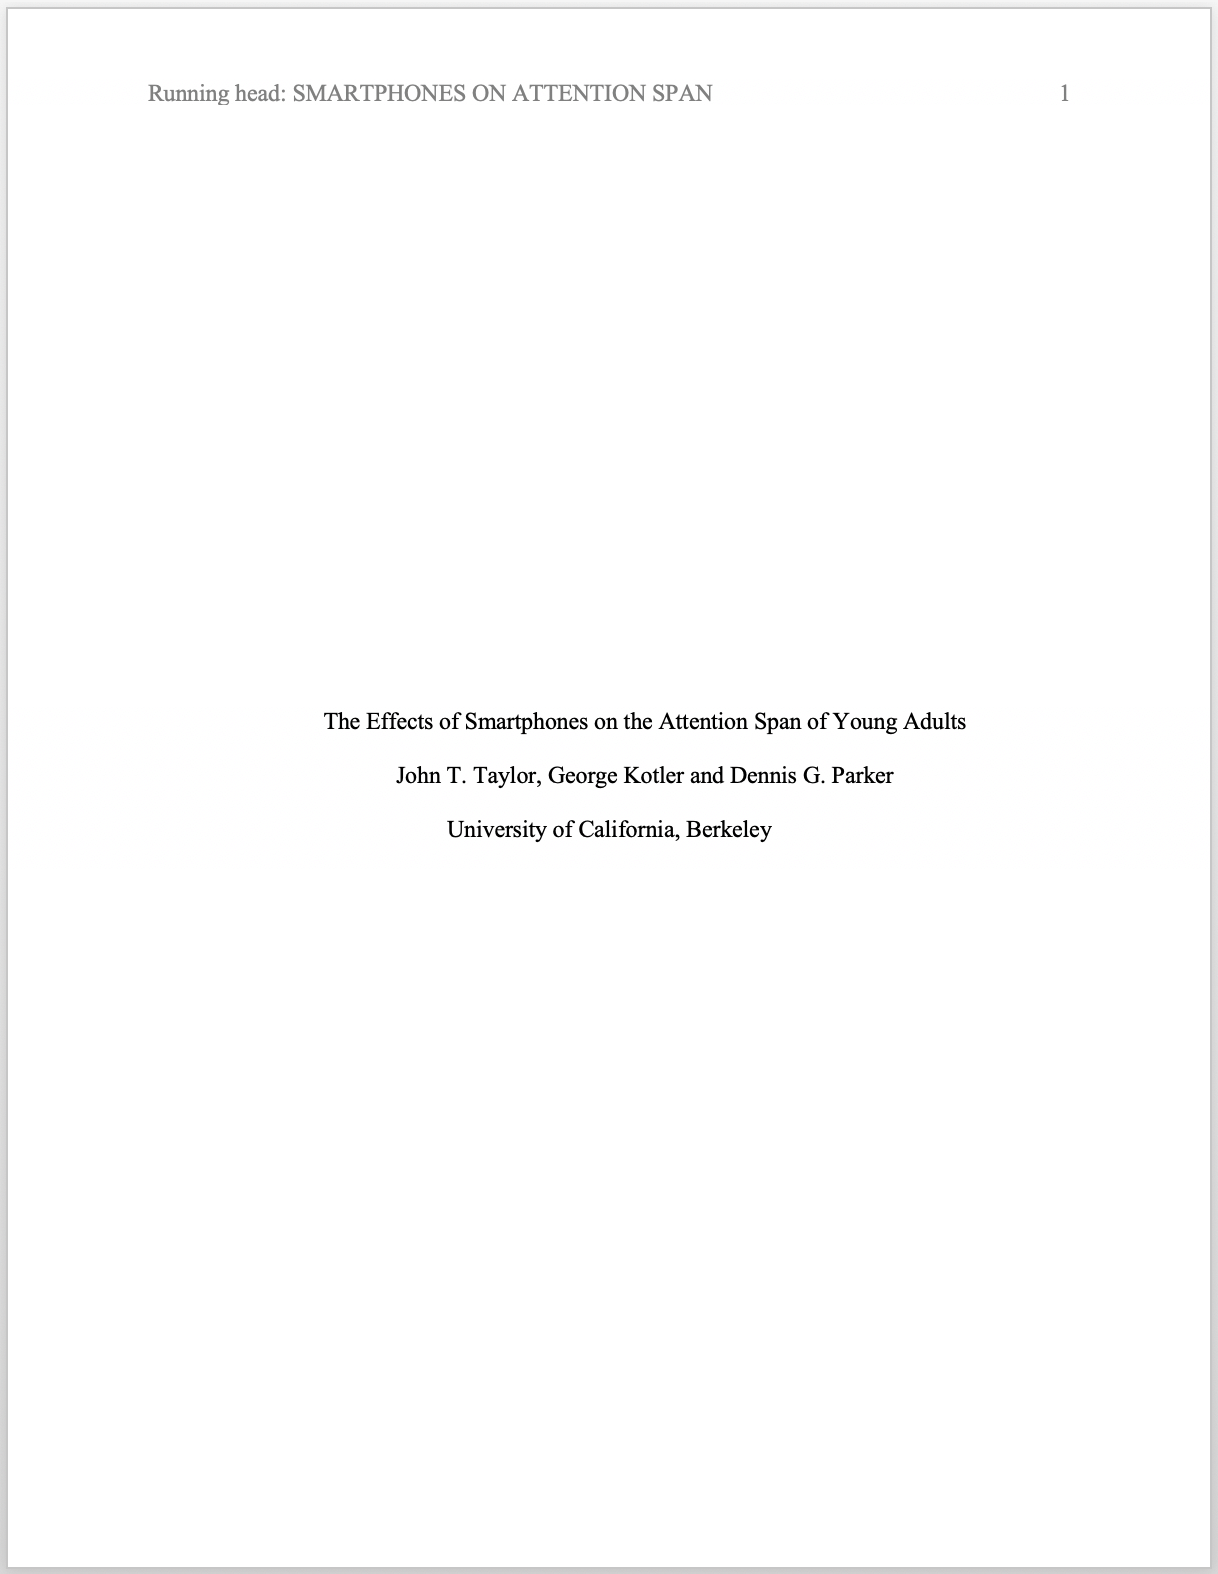 title for apa research paper